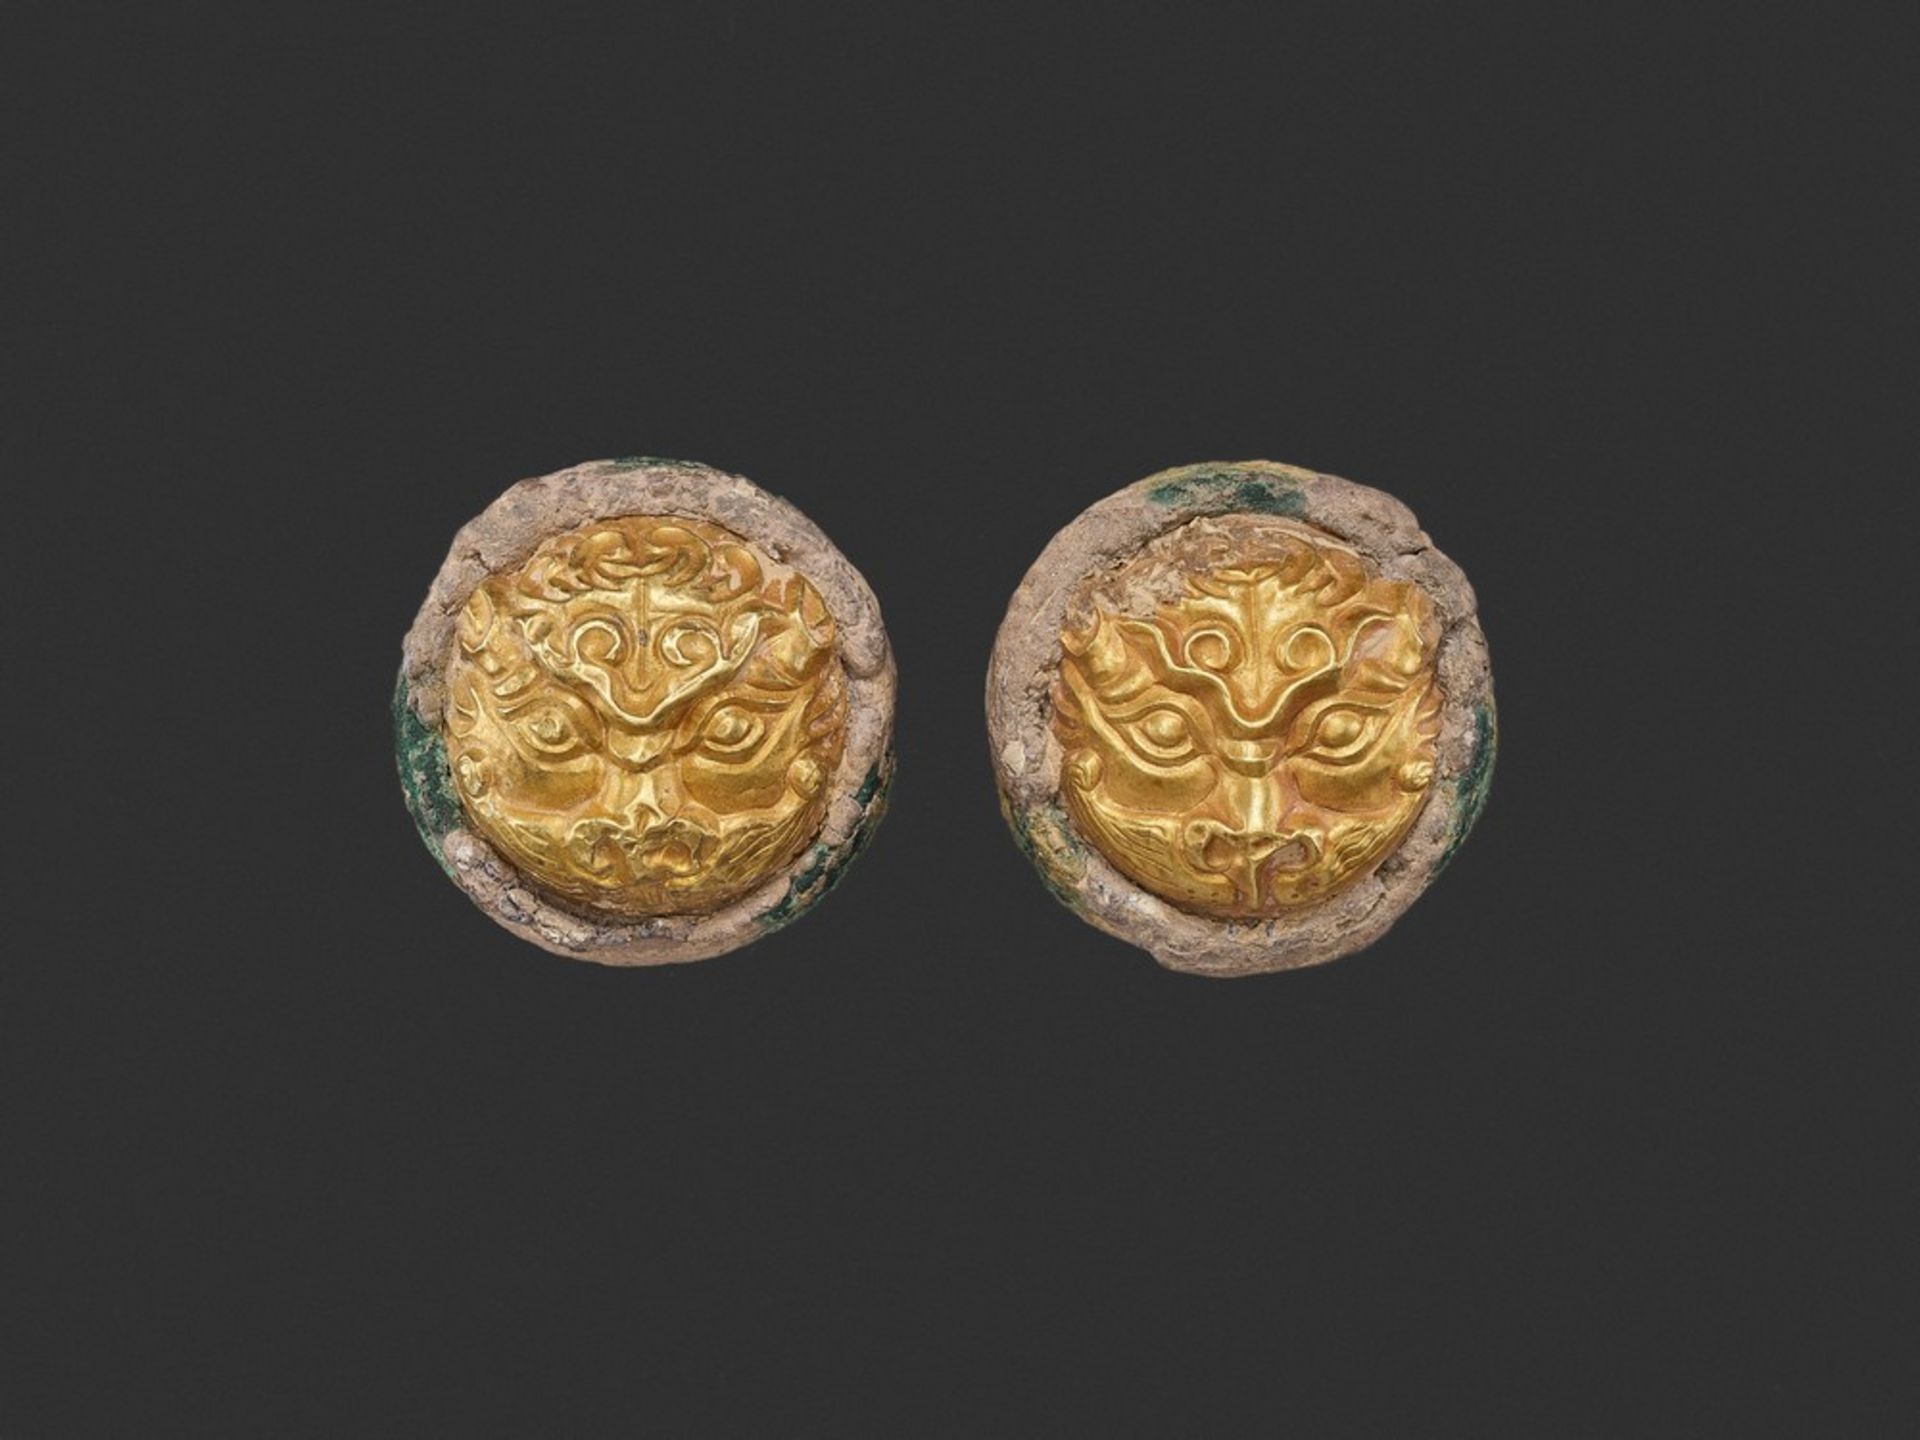 A PAIR OF GOLD REPOUSSÉ 'MYTHICAL BEAST' HORSETACK ORNAMENTS, LATE WARRING STATES TO HAN <